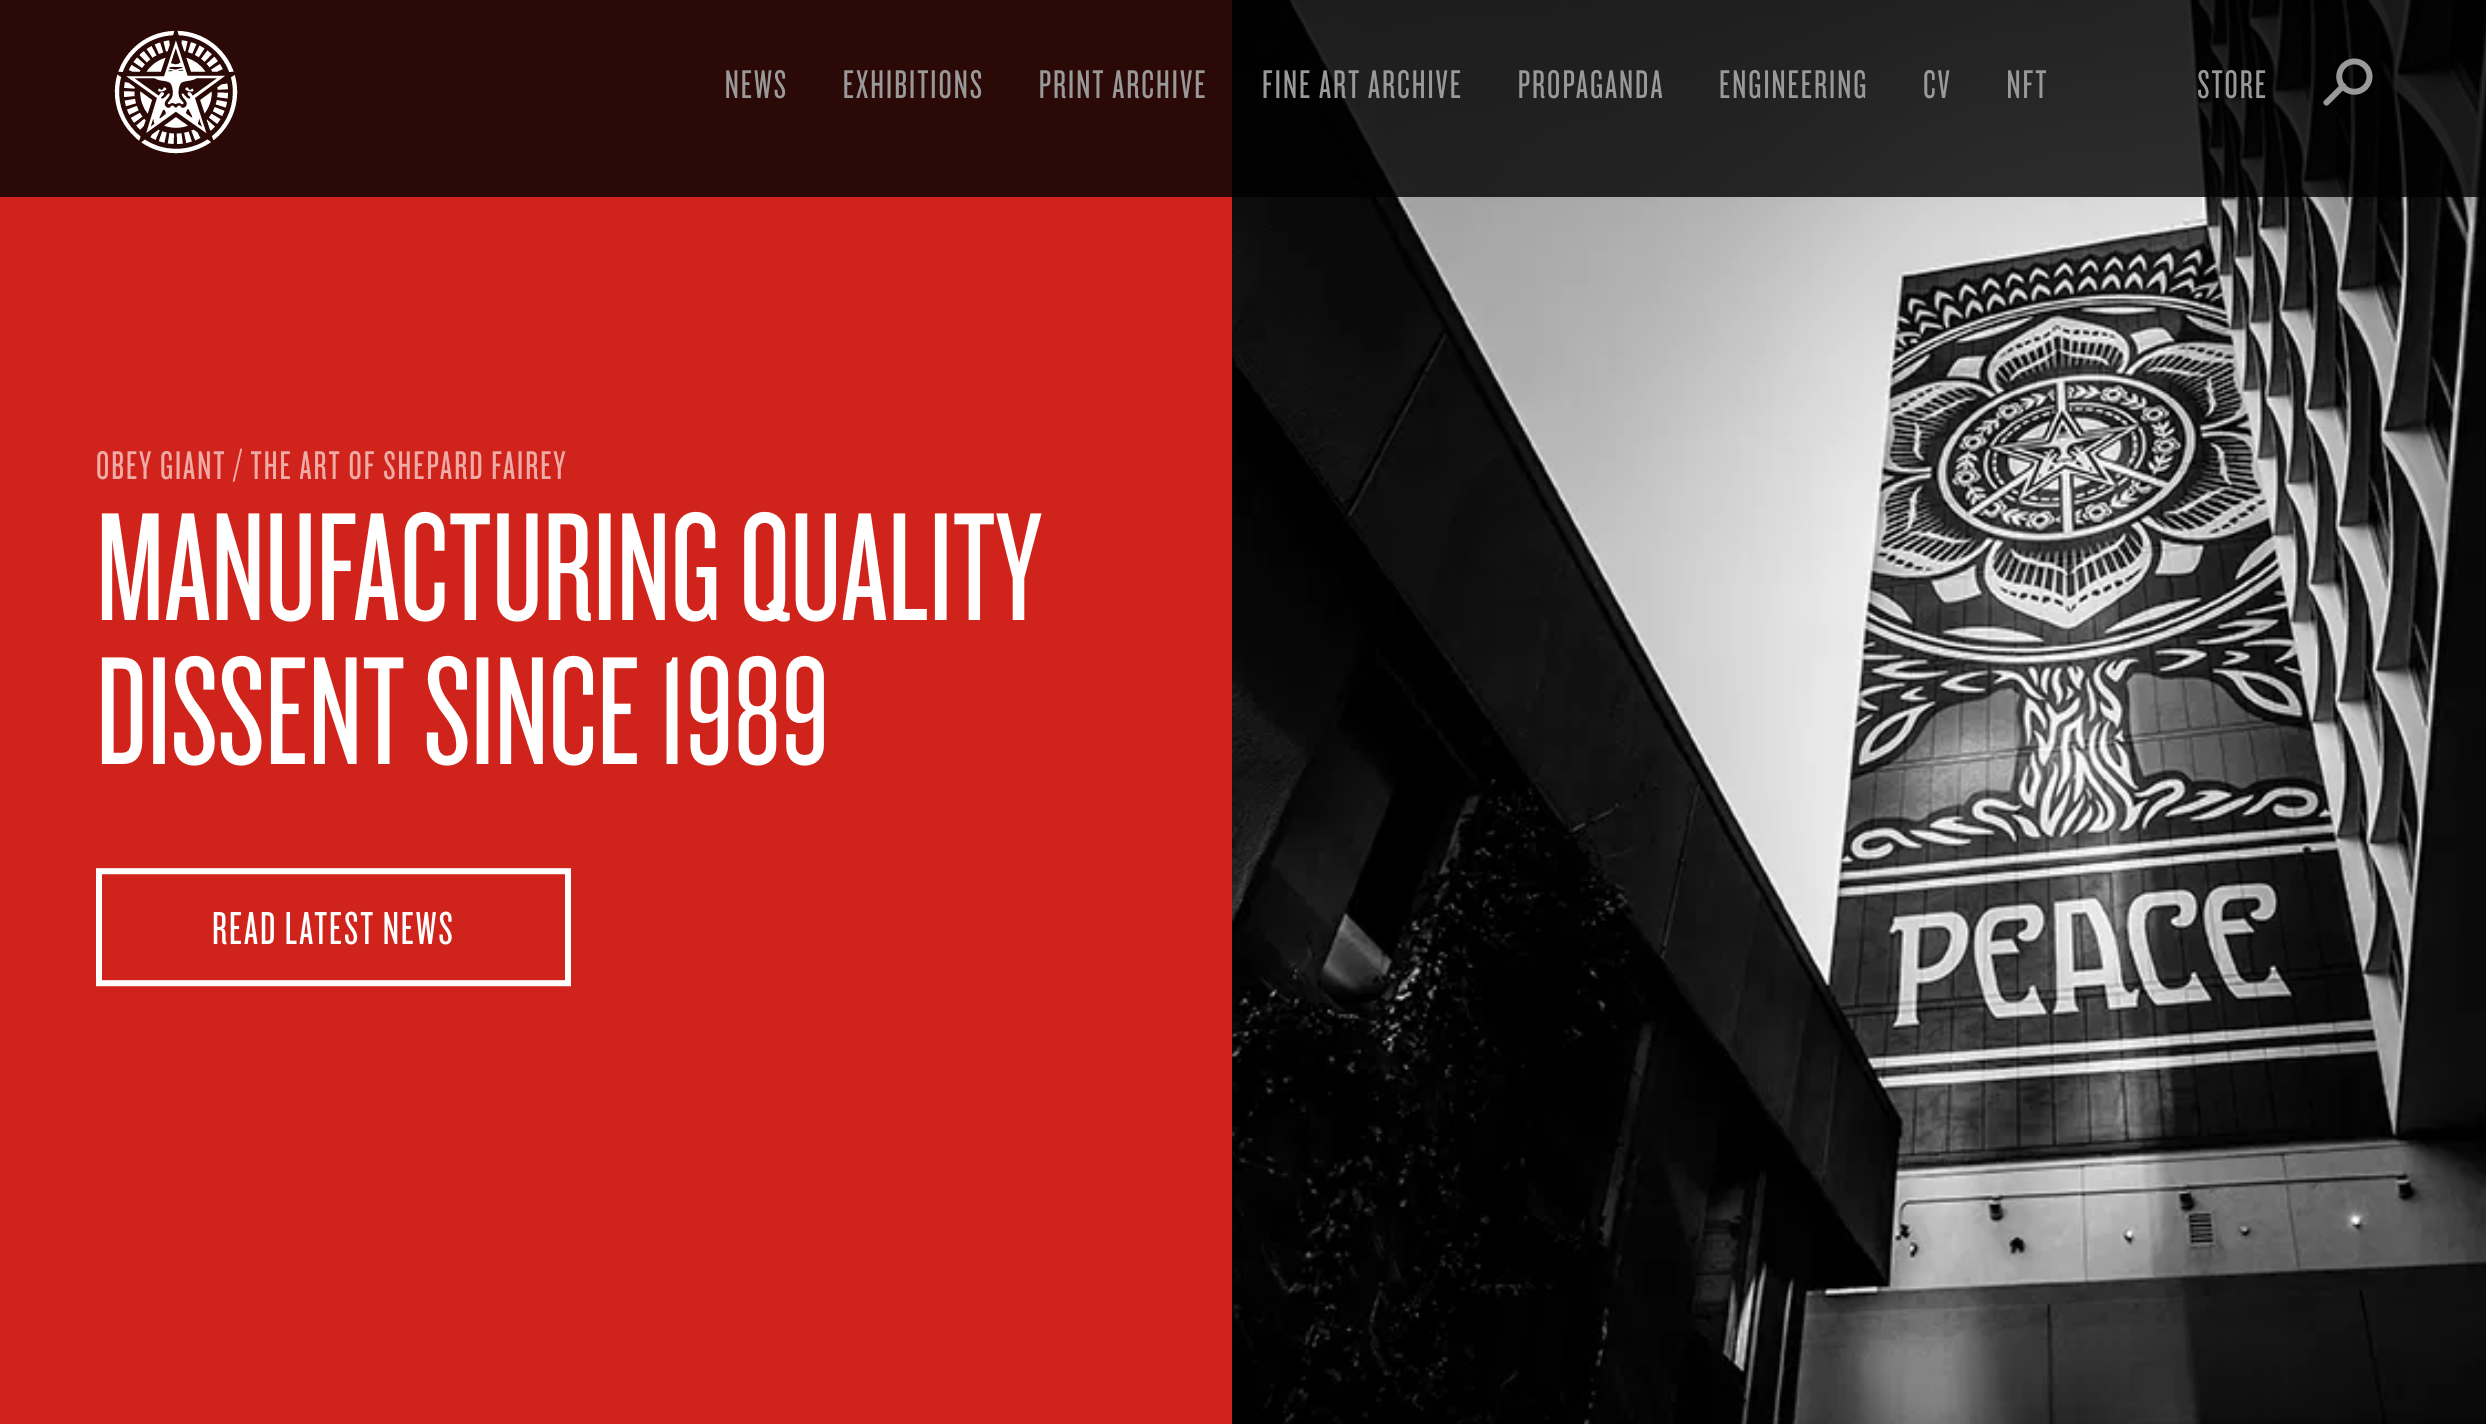 The homepage of Obey Giant, artist Shephard Fairey's website.